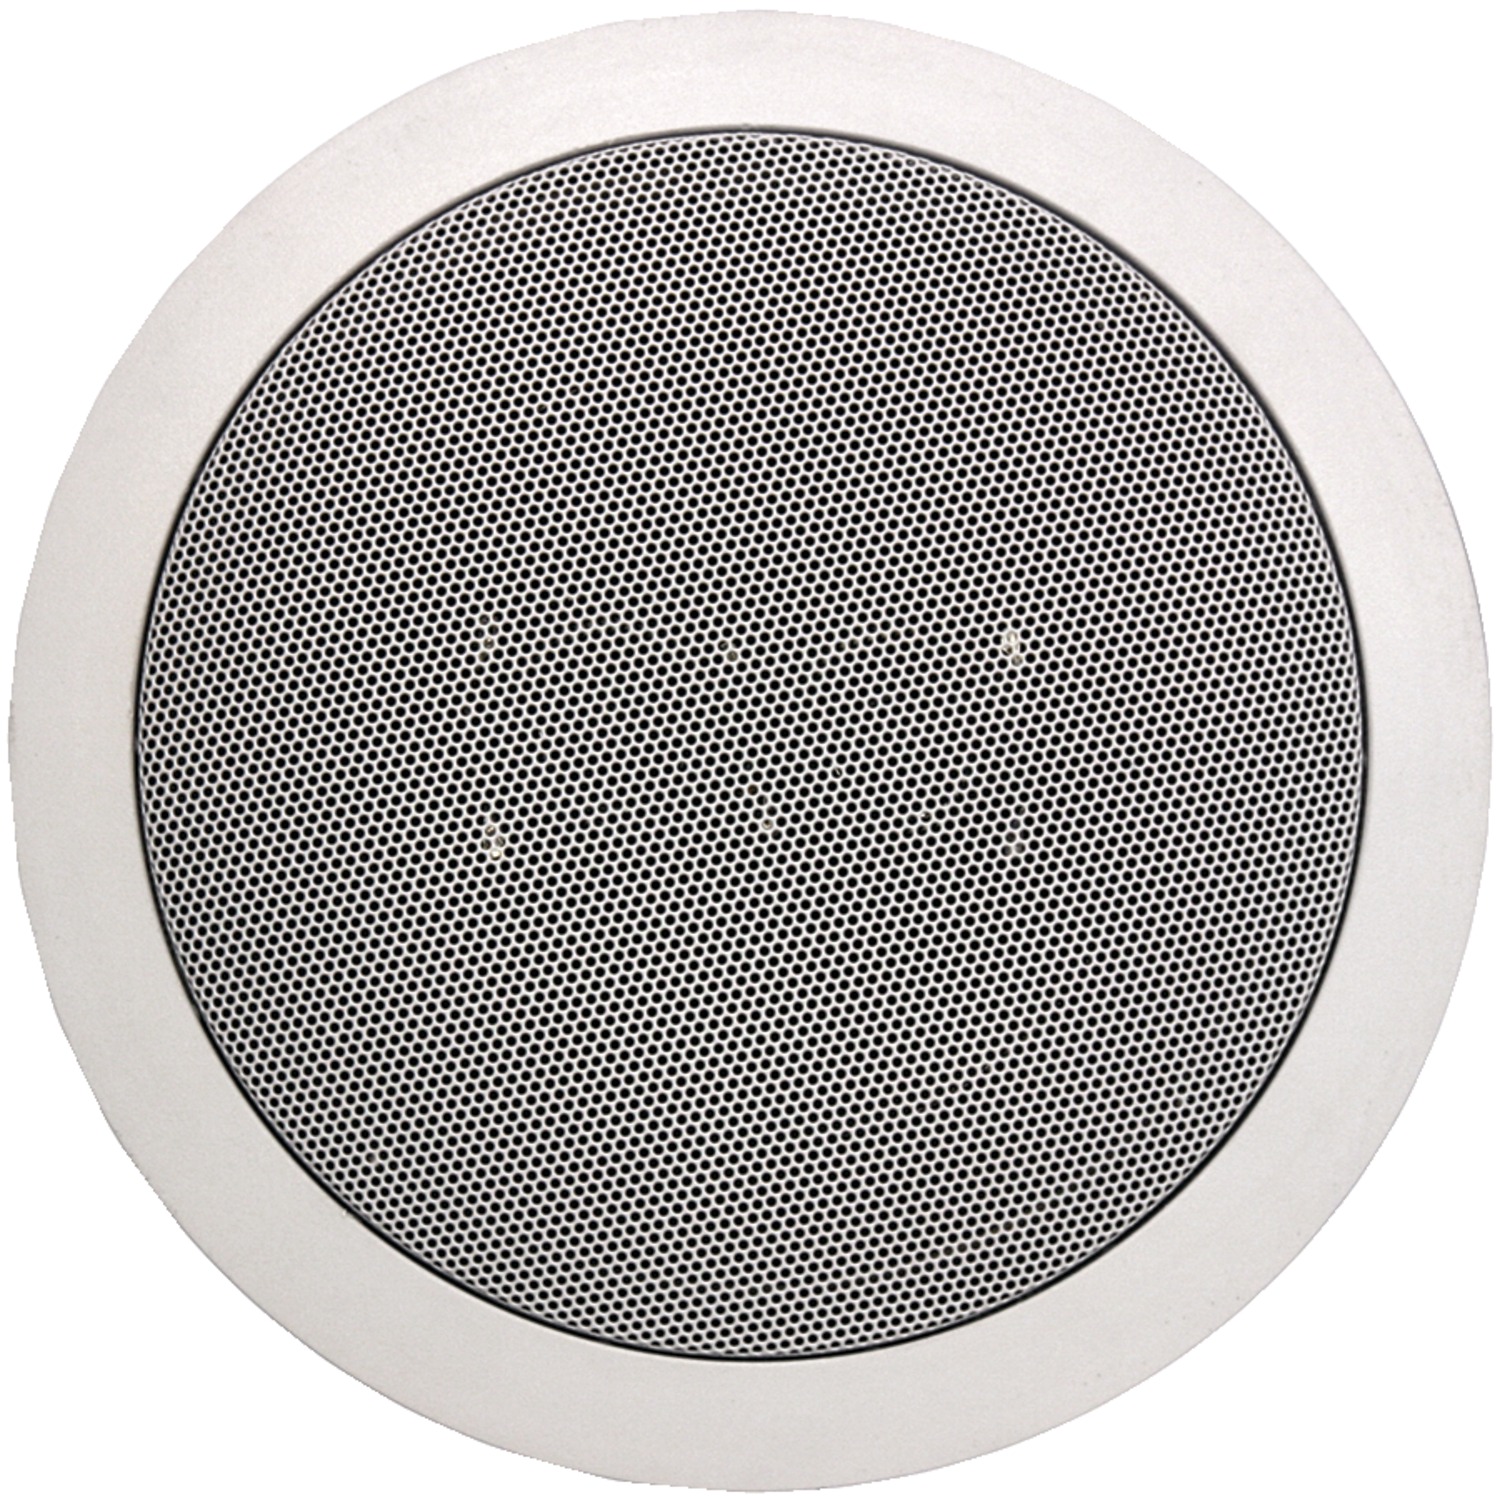 ArchiTech AP-611 6.5" 2-way Single-point Stereo In-ceiling Loudspeaker - image 2 of 2